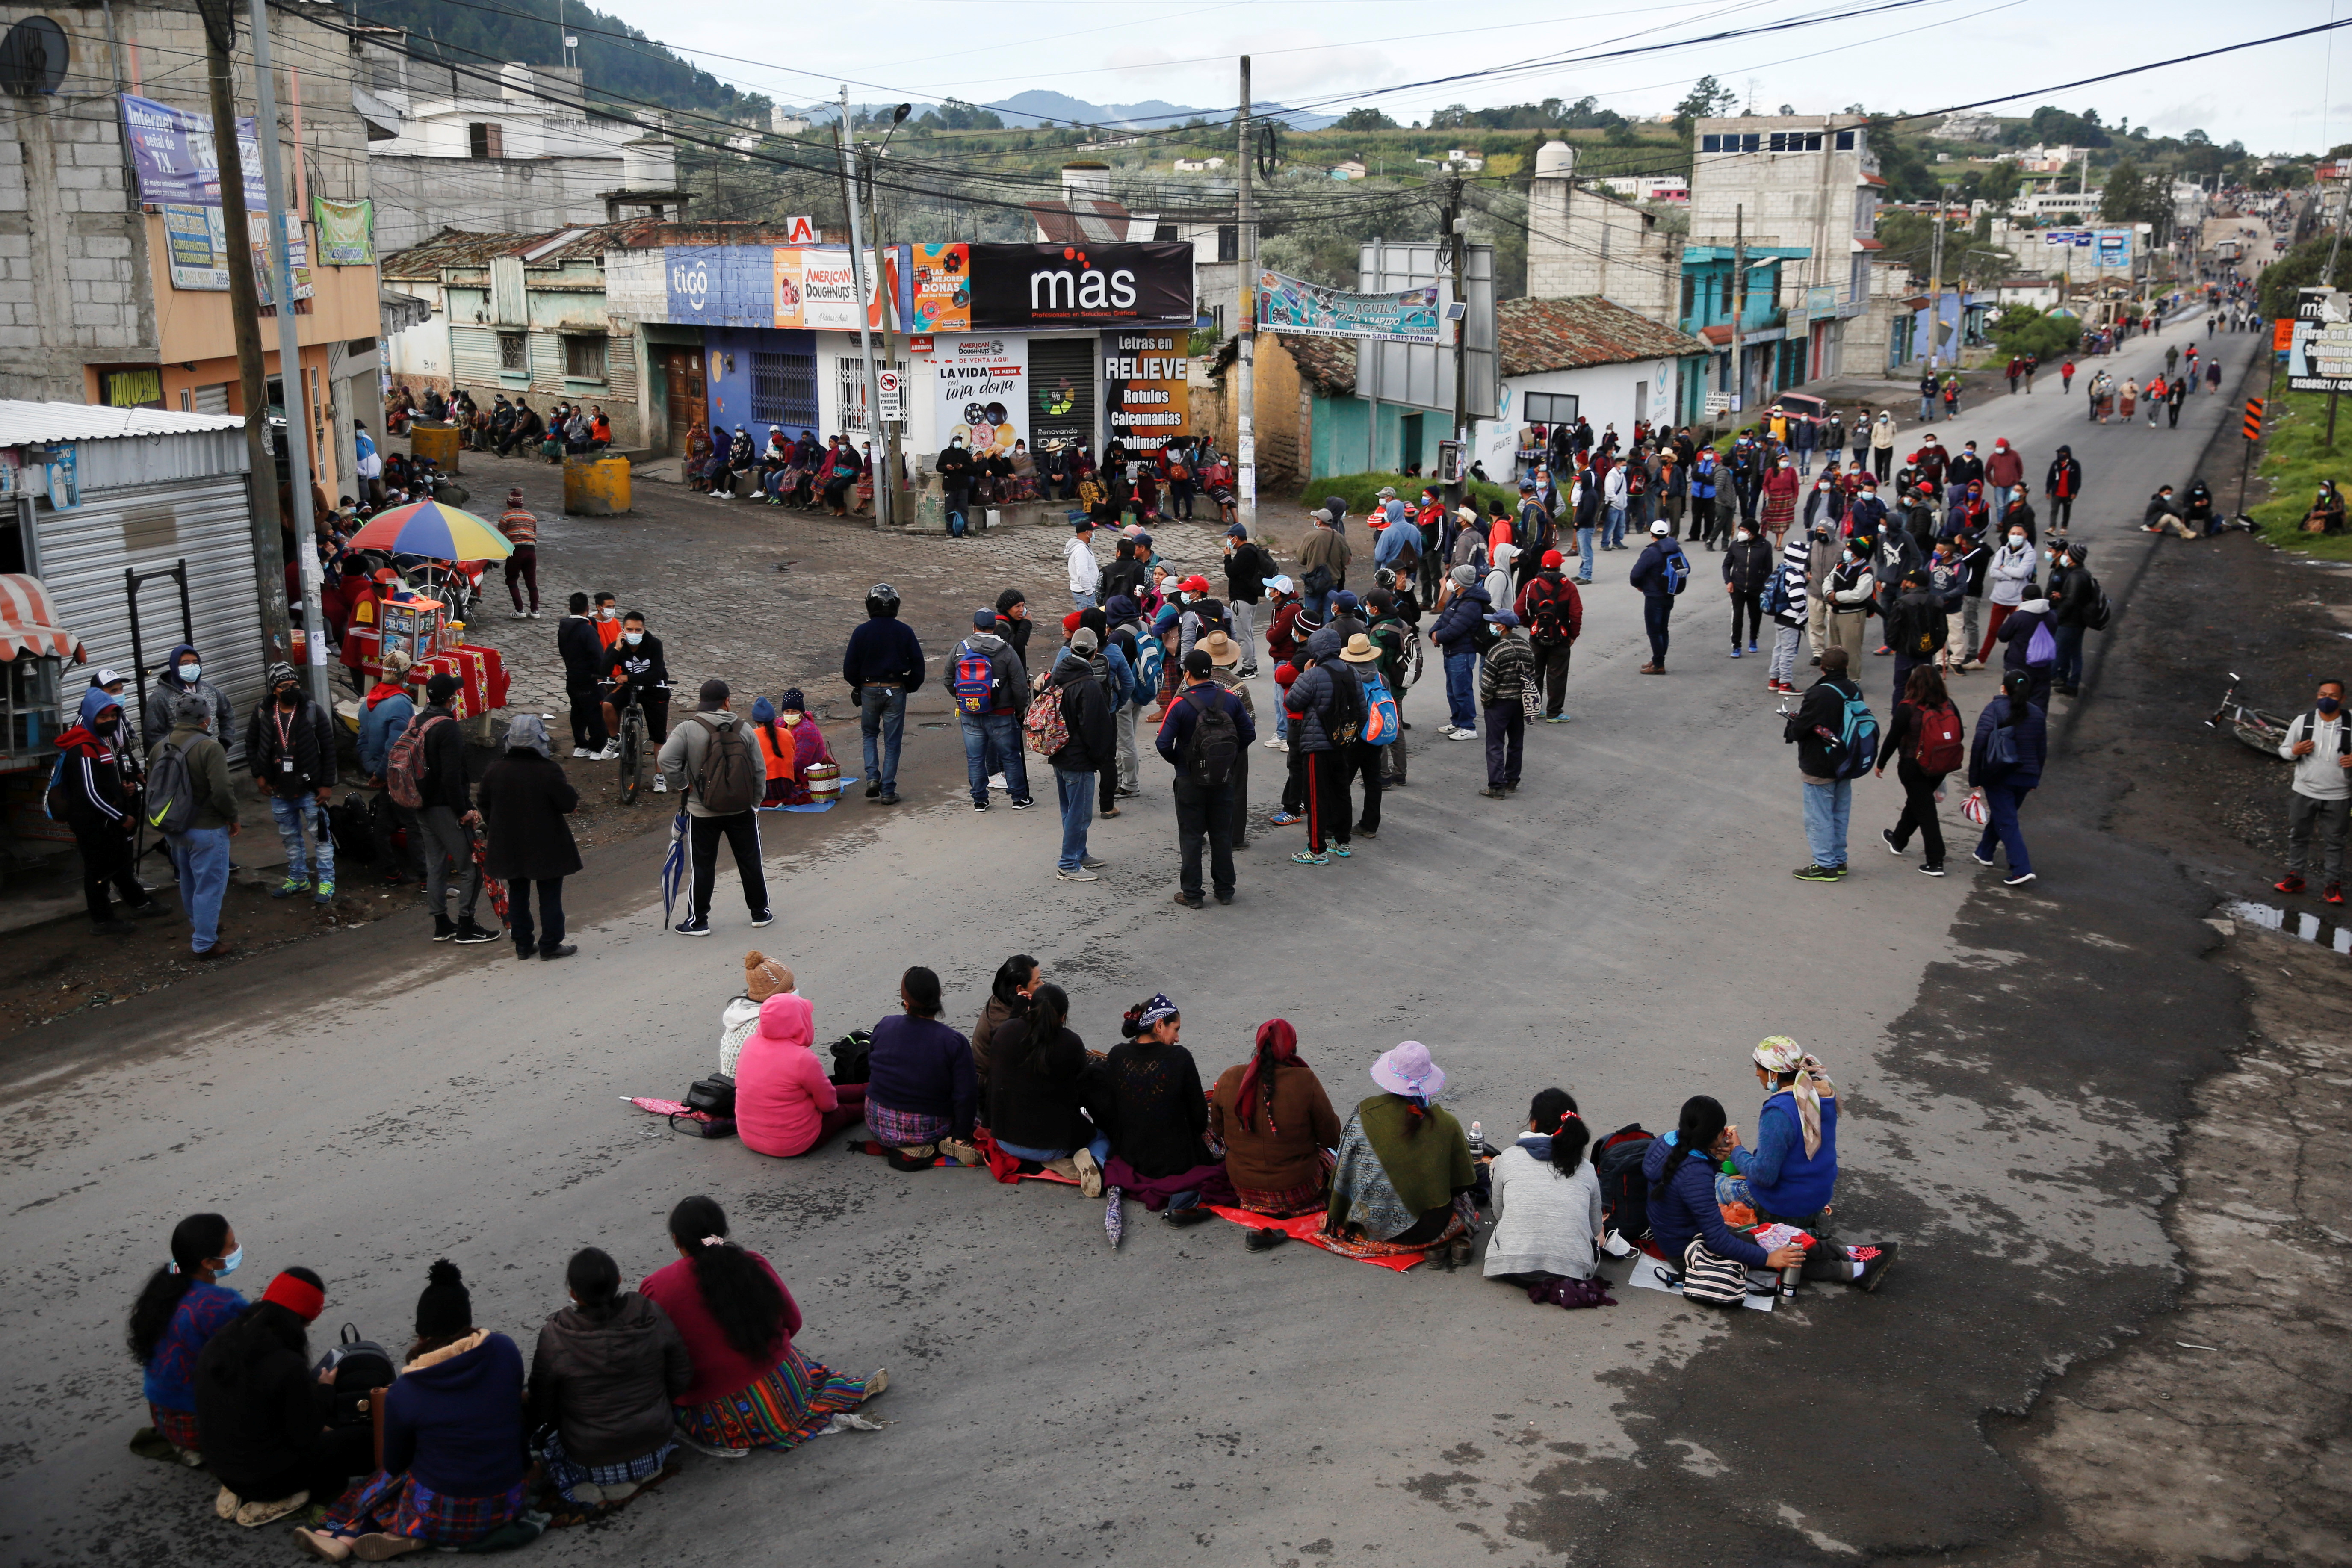 Protest demanding resignation of Guatemalan President Giammattei and Attorney General Porras in San Cristobal Totonicapan